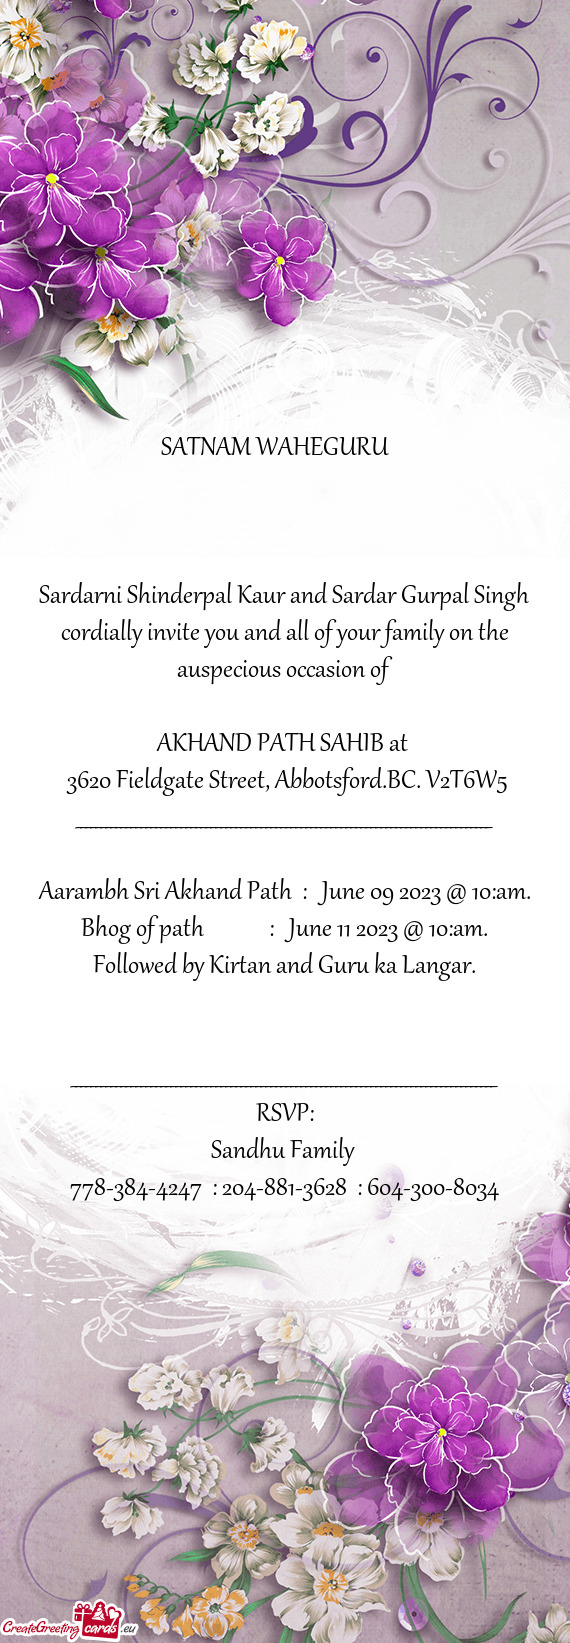 Sardarni Shinderpal Kaur and Sardar Gurpal Singh cordially invite you and all of your family on the